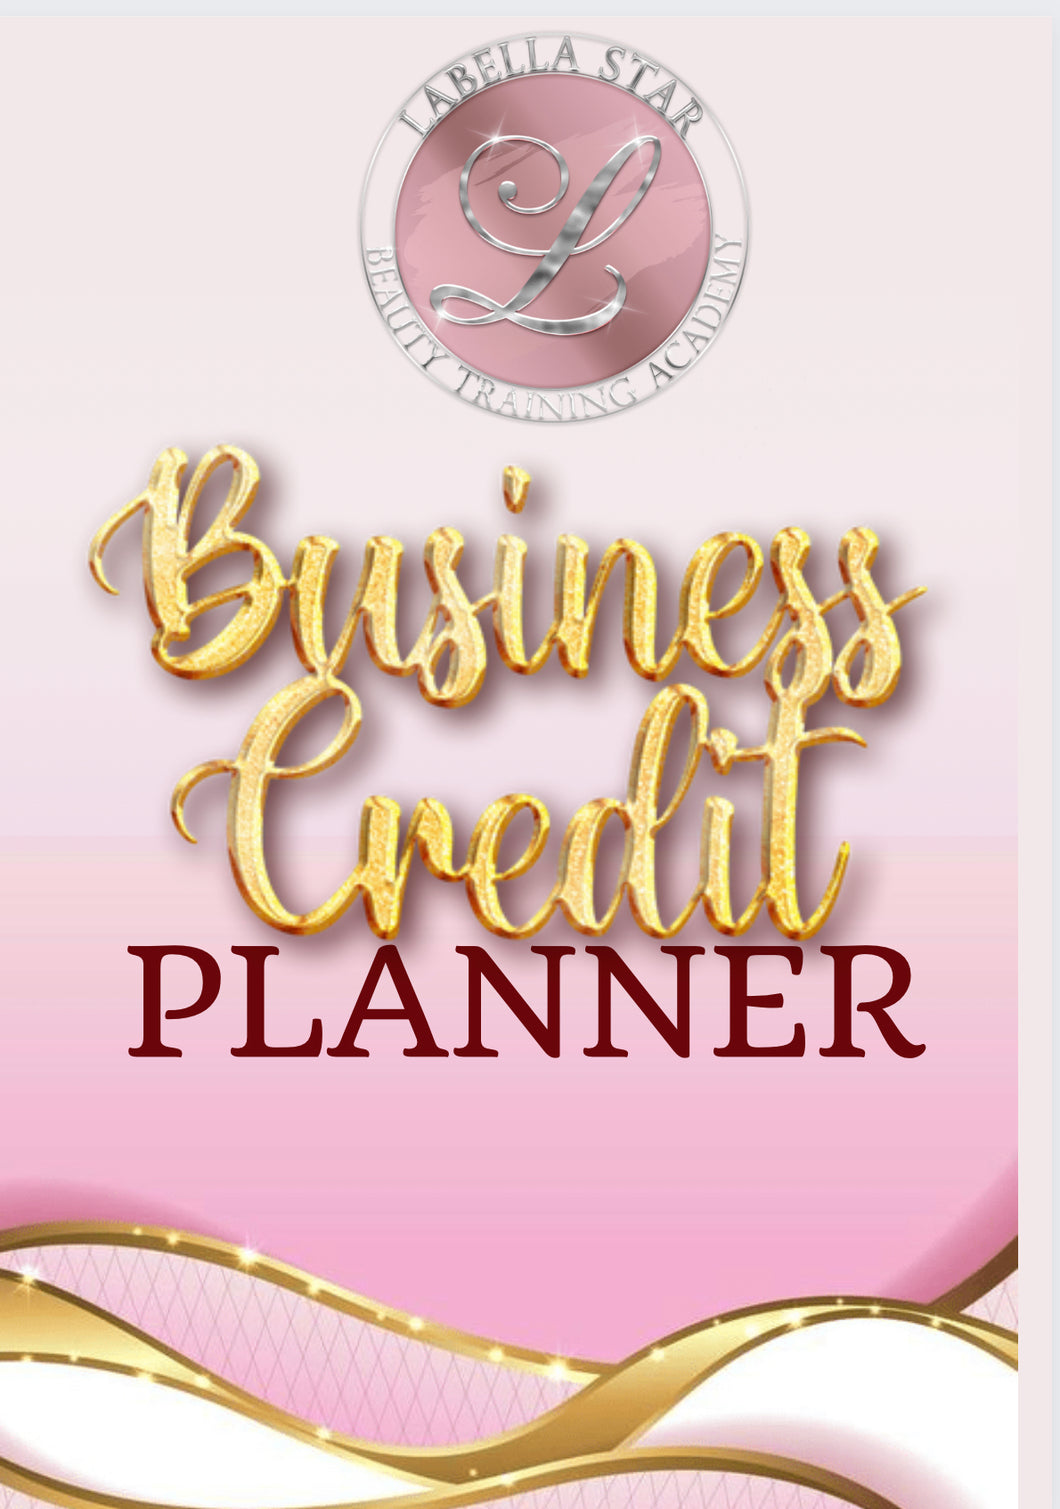 Business Credit Planner